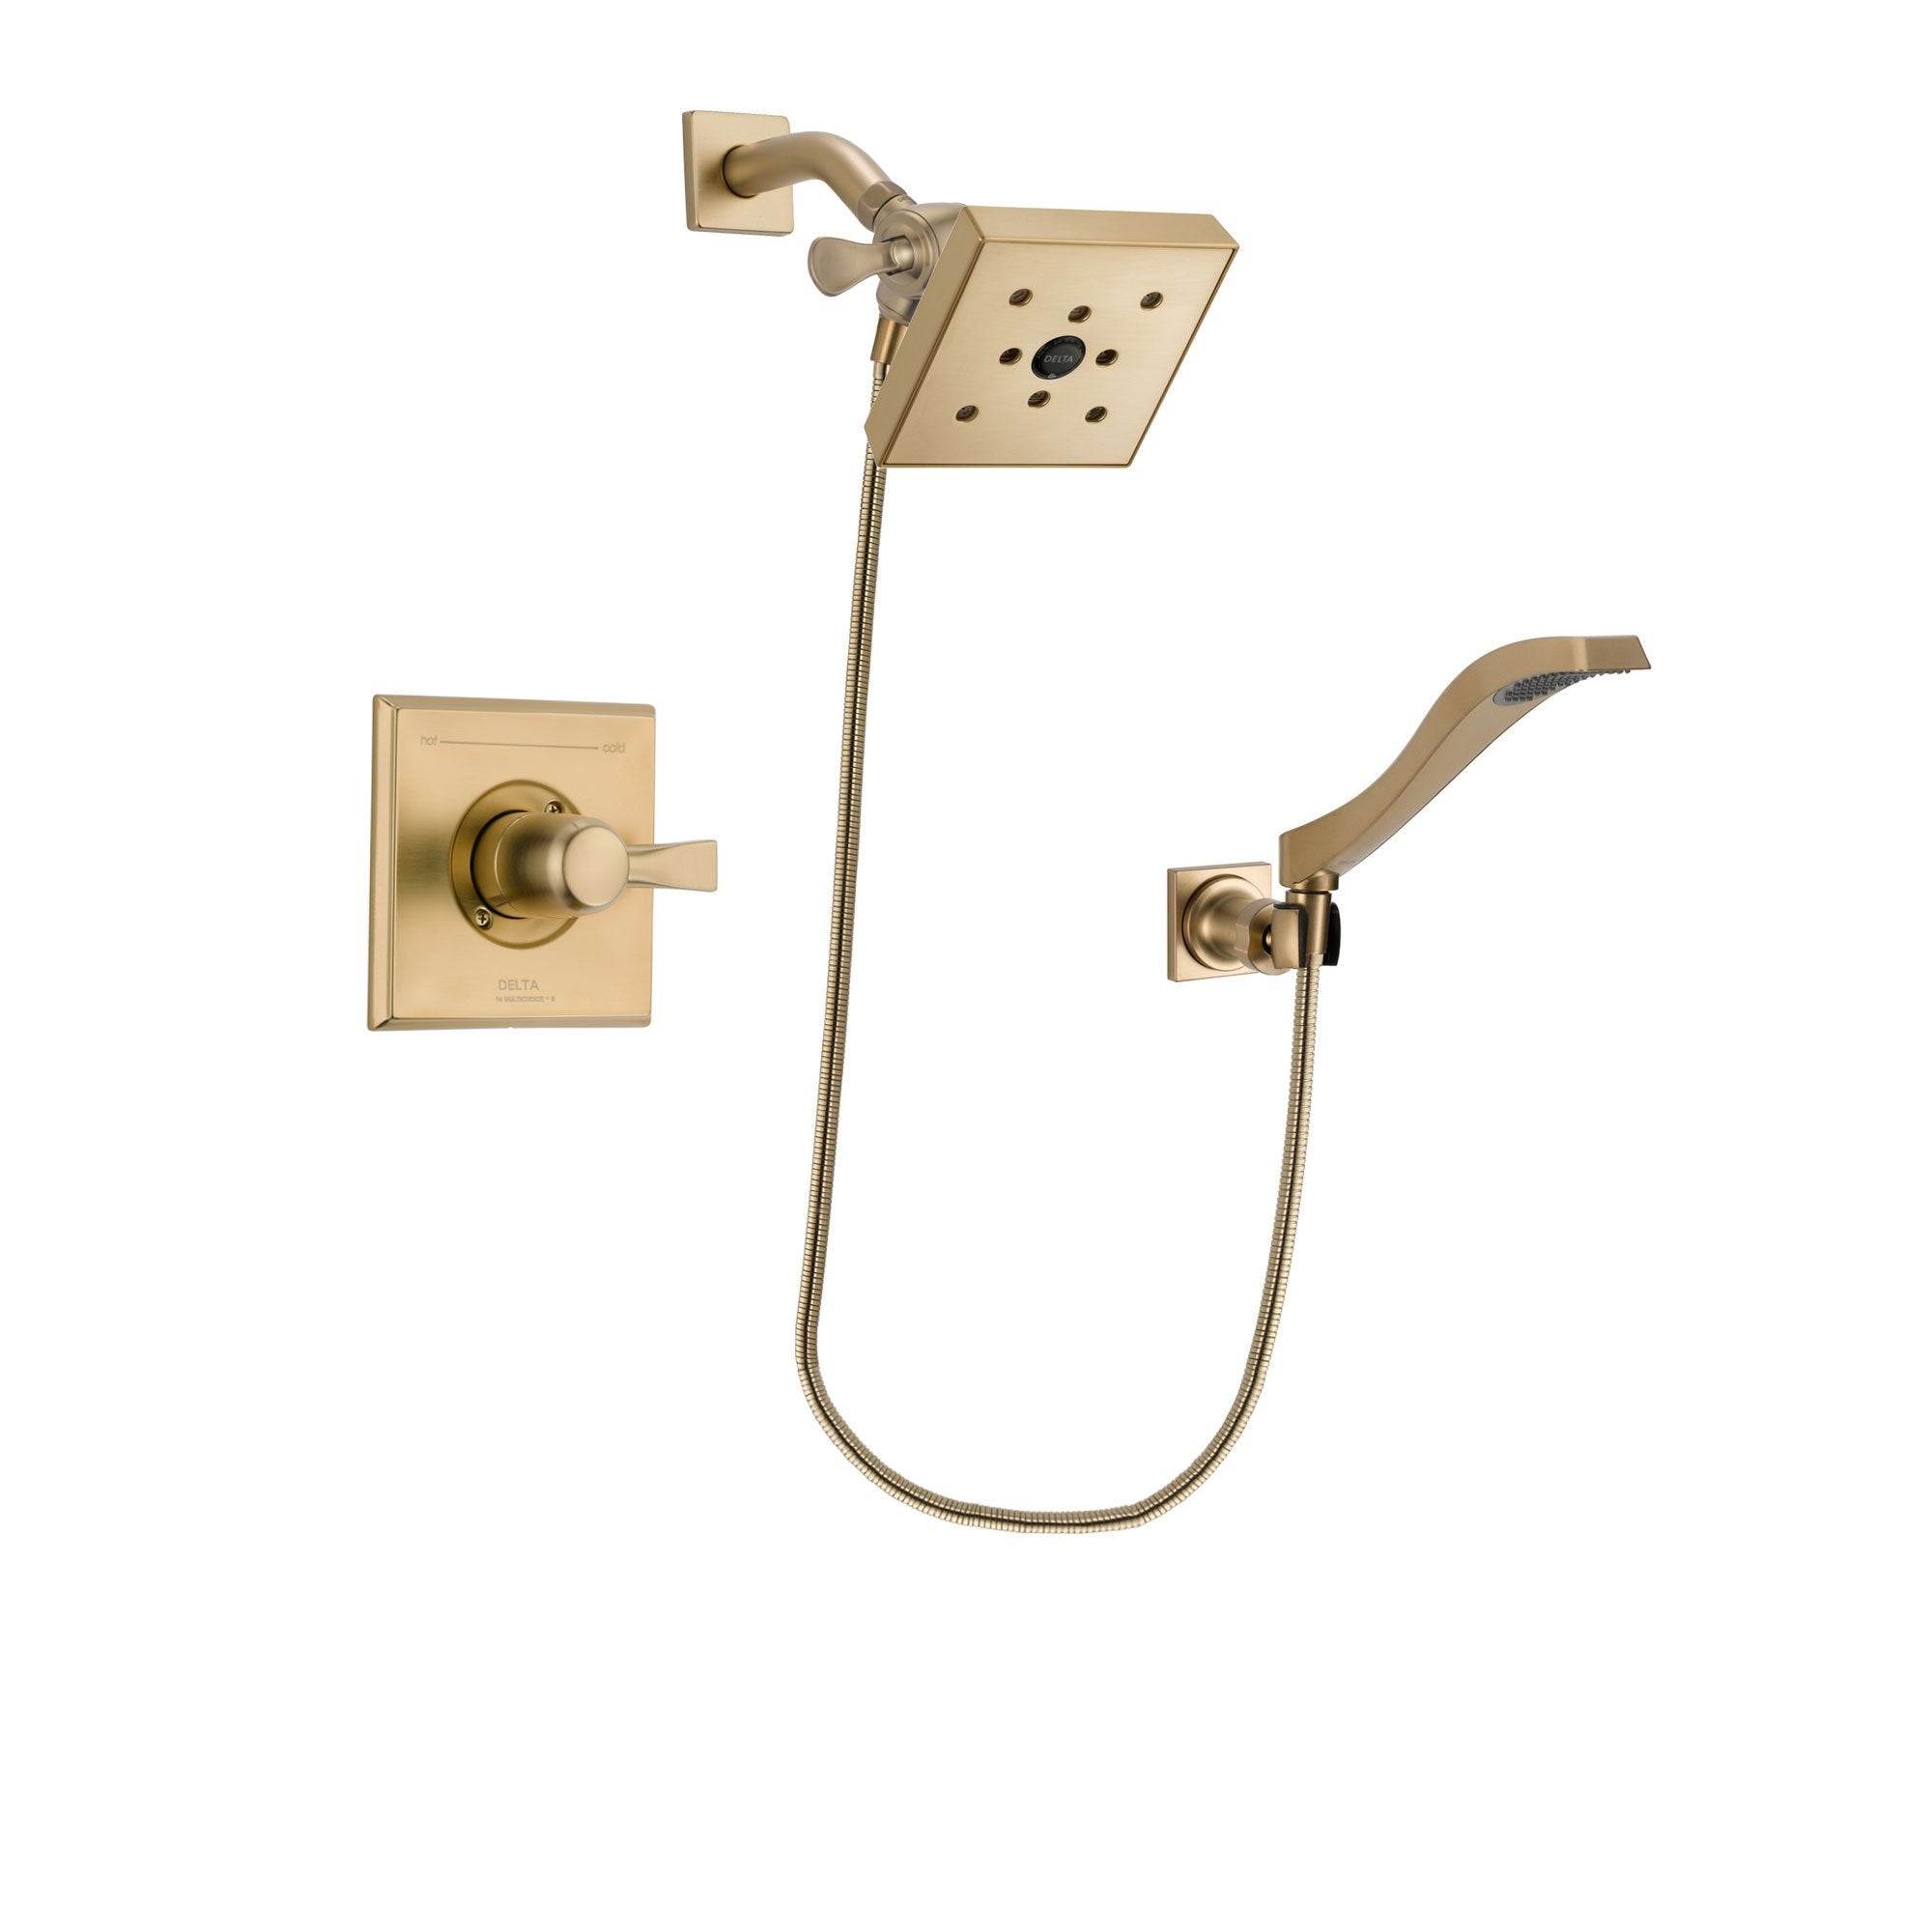 Delta Dryden Champagne Bronze Finish Shower Faucet System Package with Square Shower Head and Modern Wall Mount Handheld Shower Spray Includes Rough-in Valve DSP3866V